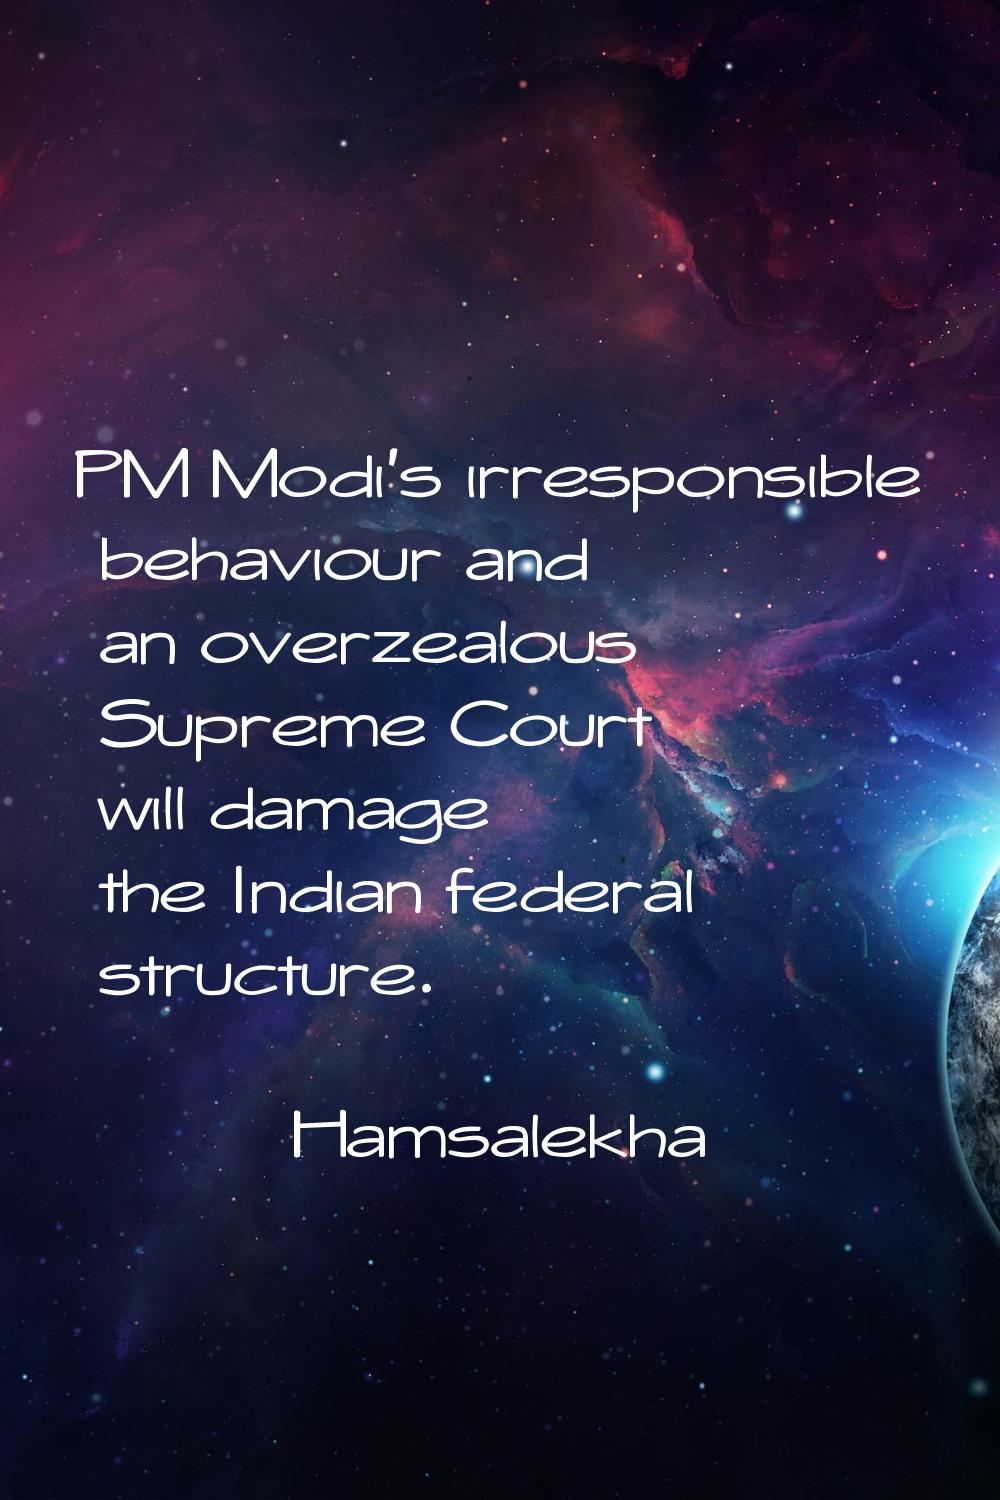 PM Modi's irresponsible behaviour and an overzealous Supreme Court will damage the Indian federal s